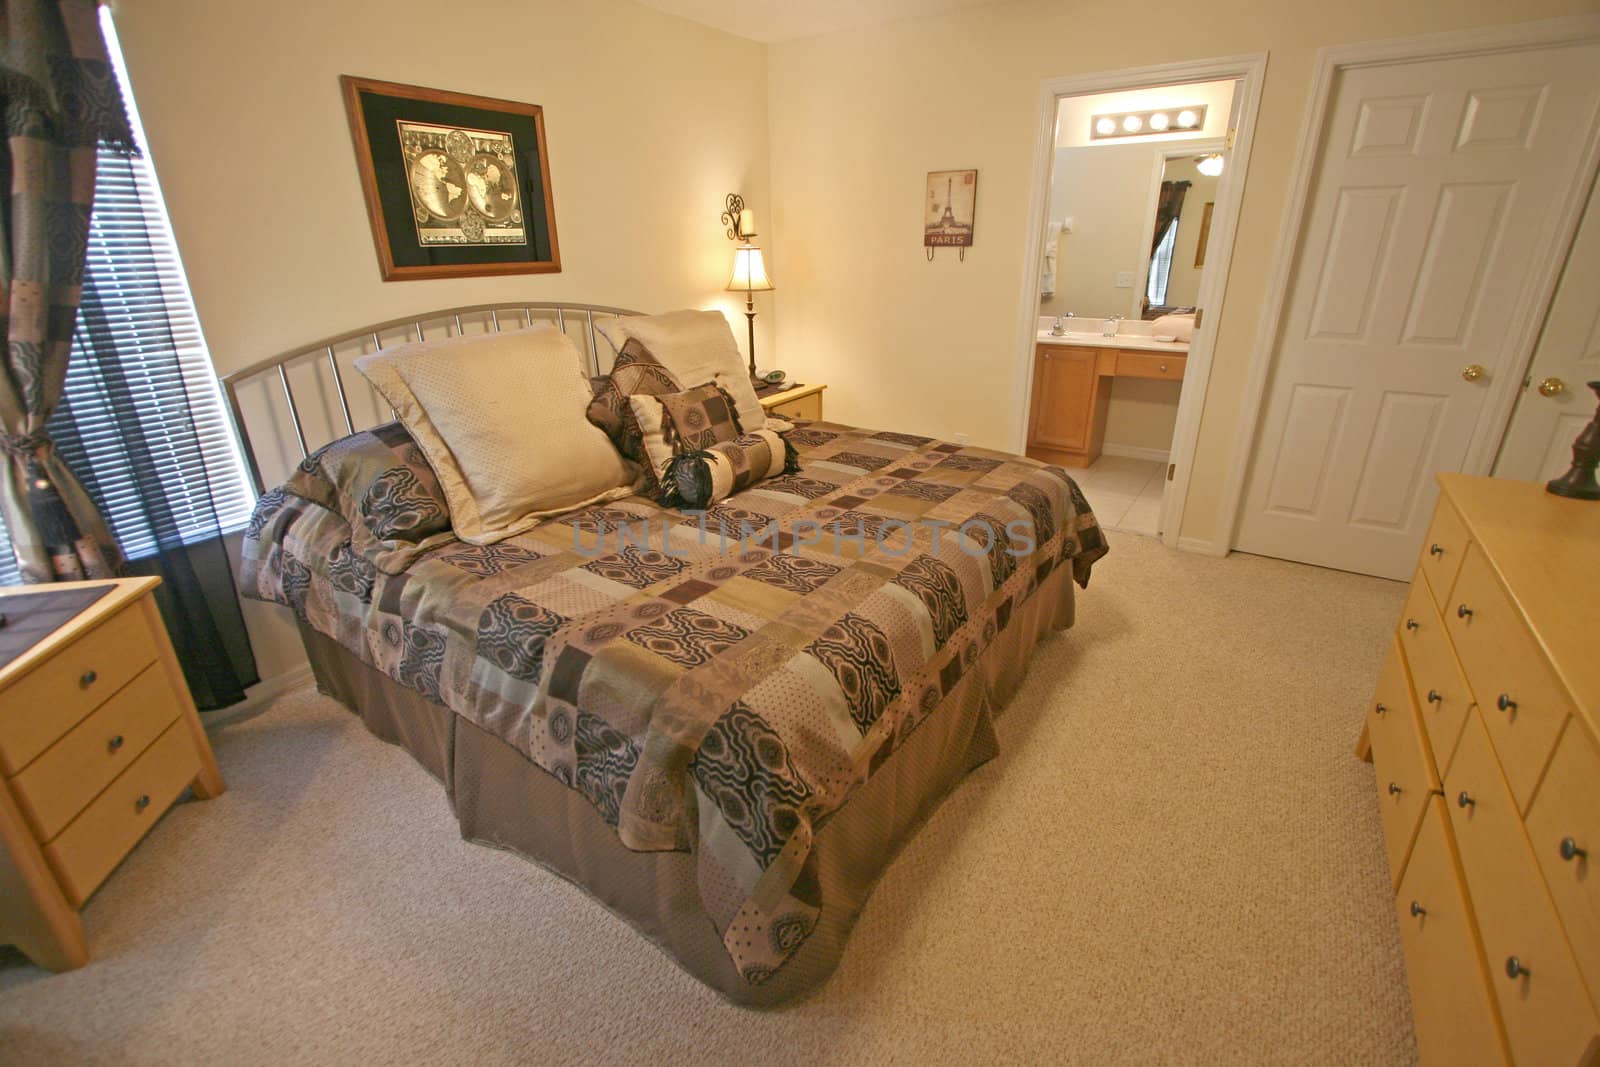 A Master Bedroom, Interior Shot in a Home